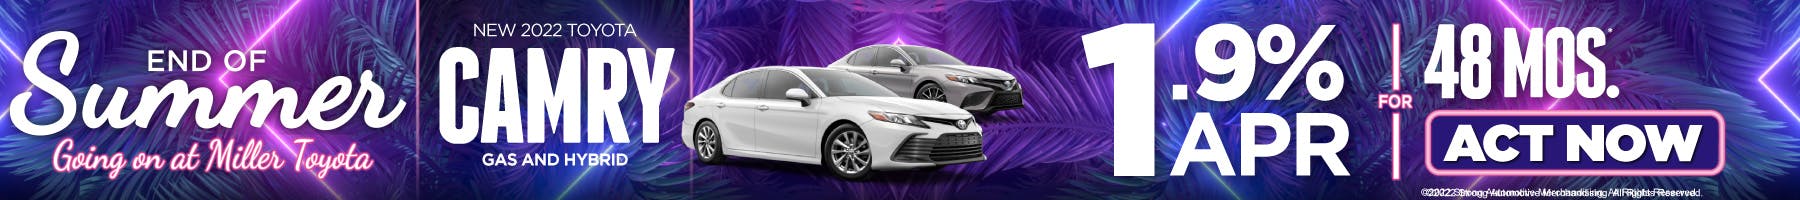 End of Summer – Camry